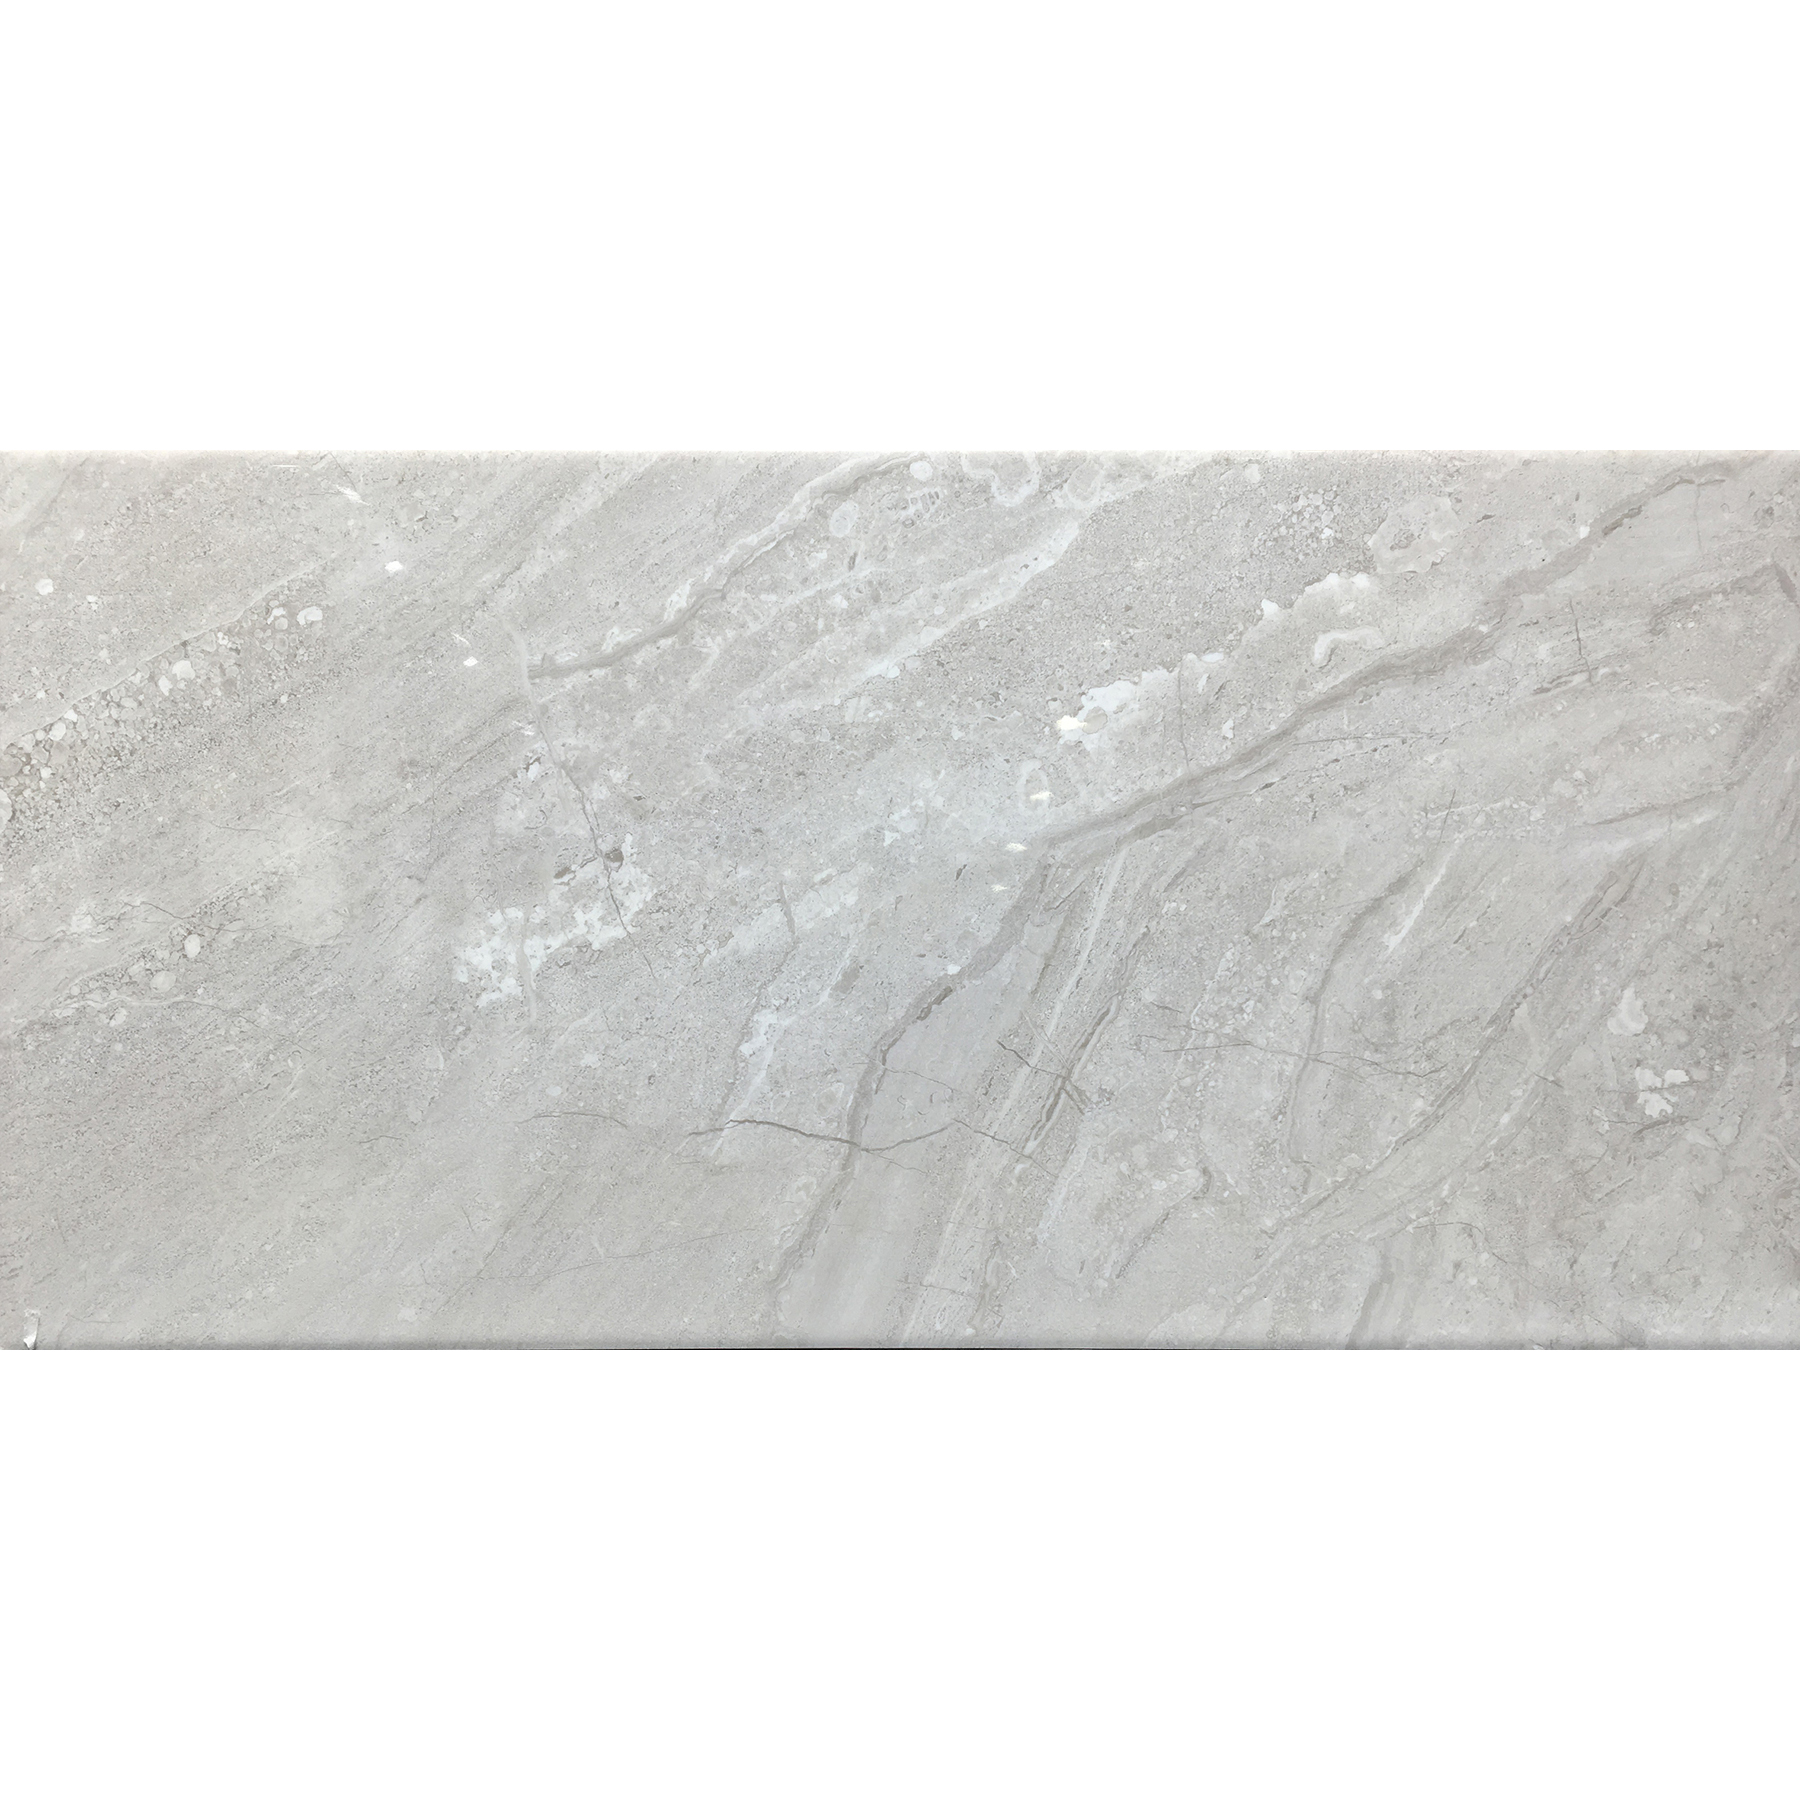 D0211 Series 300*600mm Wall Tile Stone